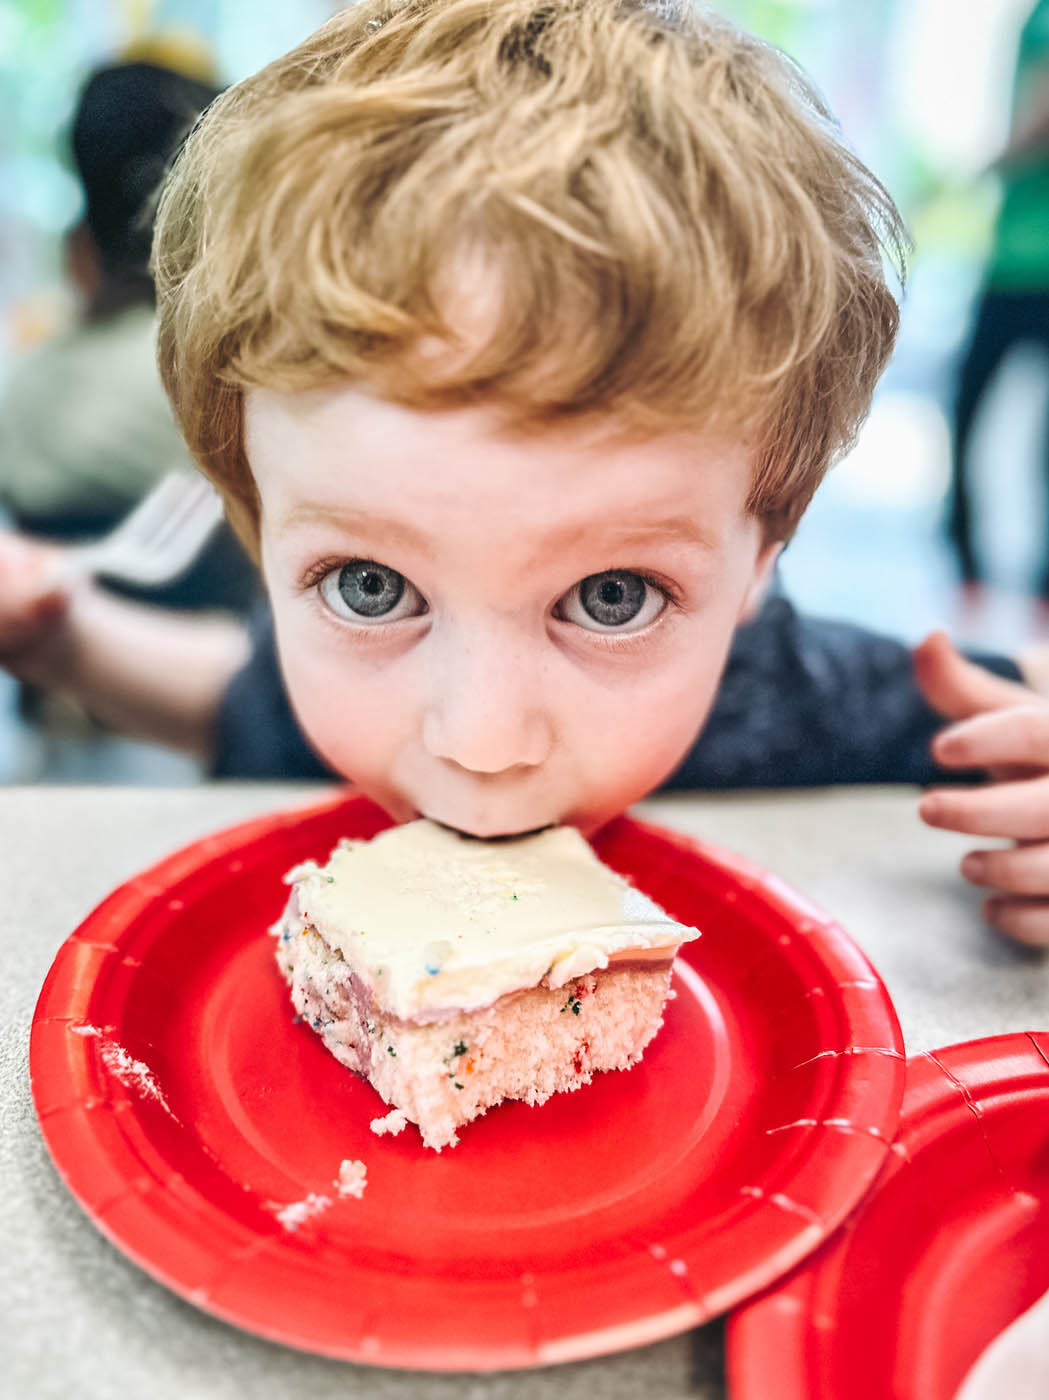 A kid taking a big bite out of a cake piece at Romp n' Roll - a children's party place in Wethersfield, CT.